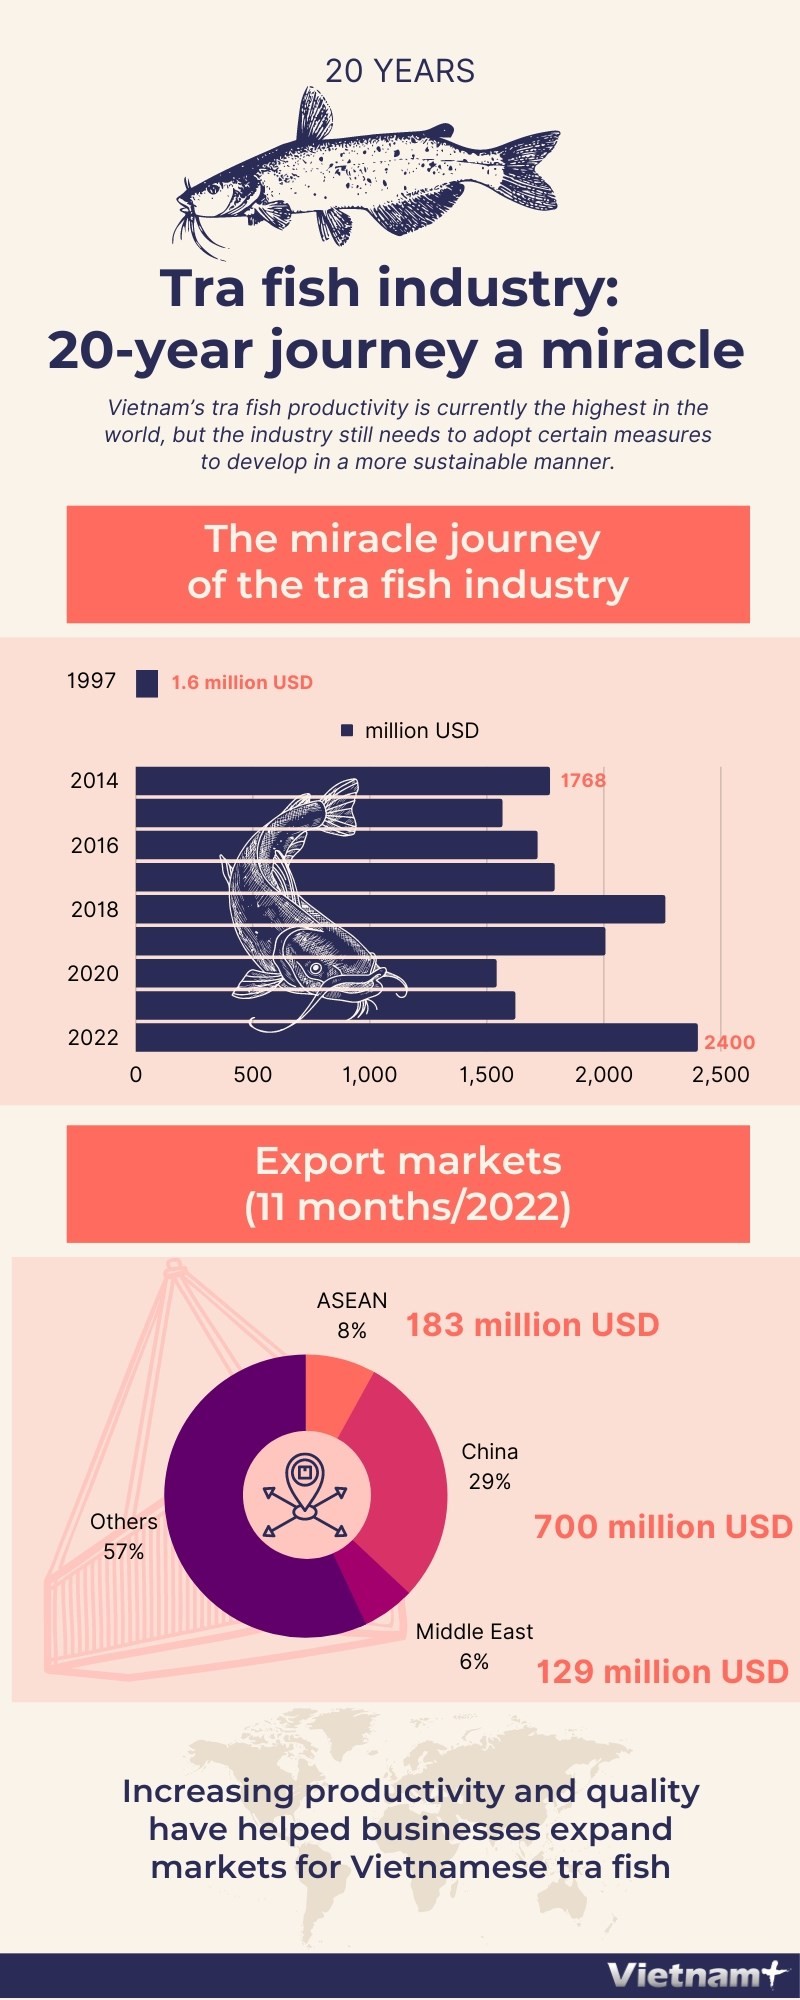 Vietnam’s tra fish productivity is currently the highest in the world, but the industry still needs to adopt certain measures to develop in a more sustainable manner.